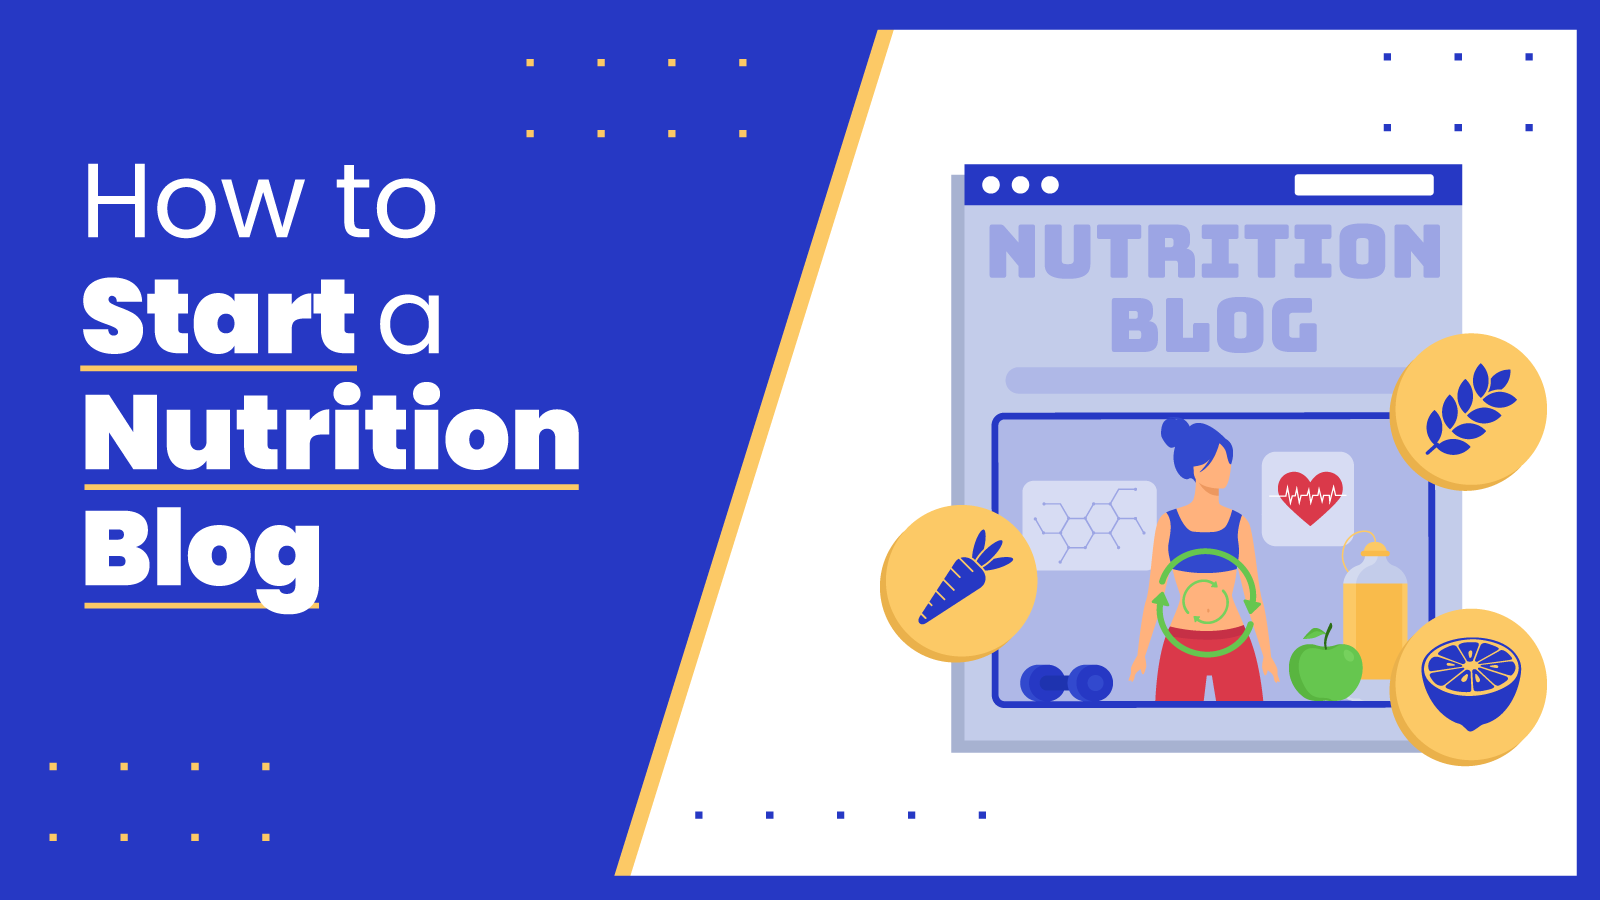 How To Start a Nutrition Blog